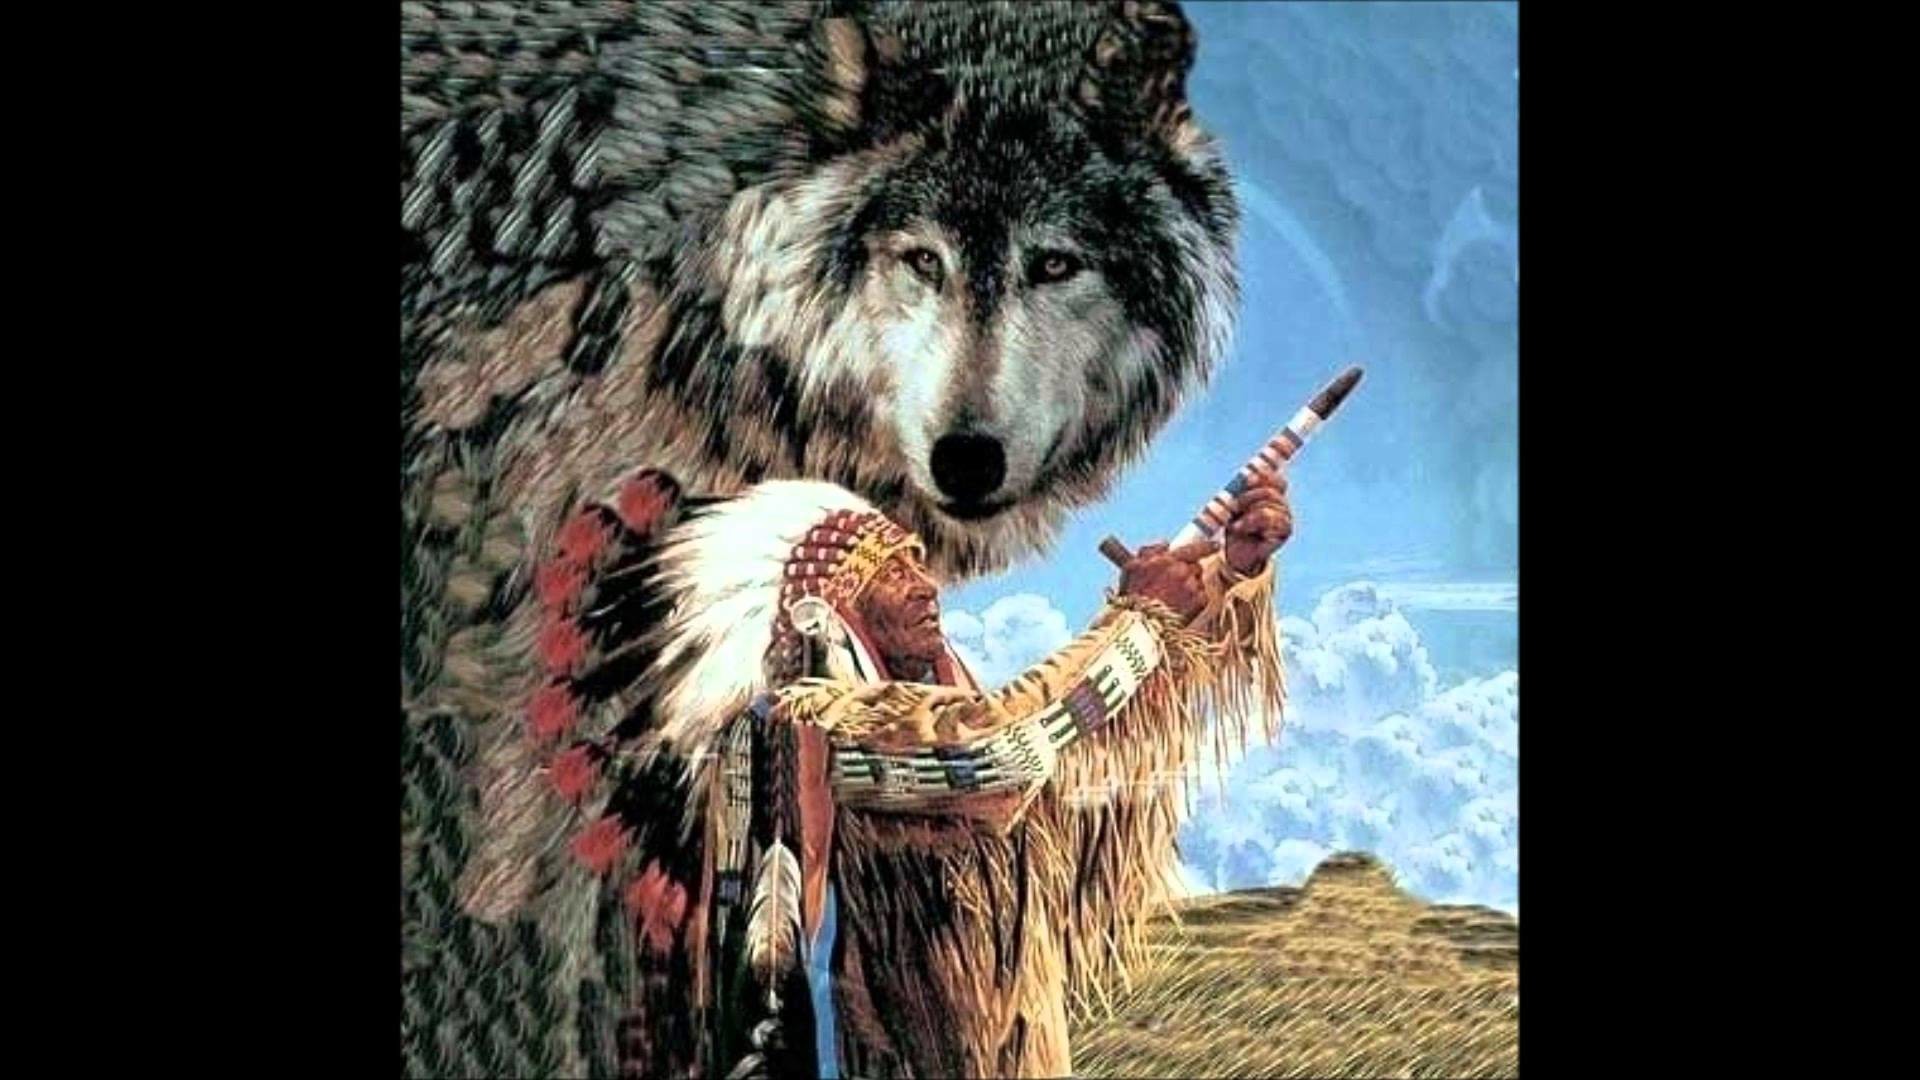 1920x1080 Cherokee tribal animals images - leonardo dicaprio pictures hd for gate